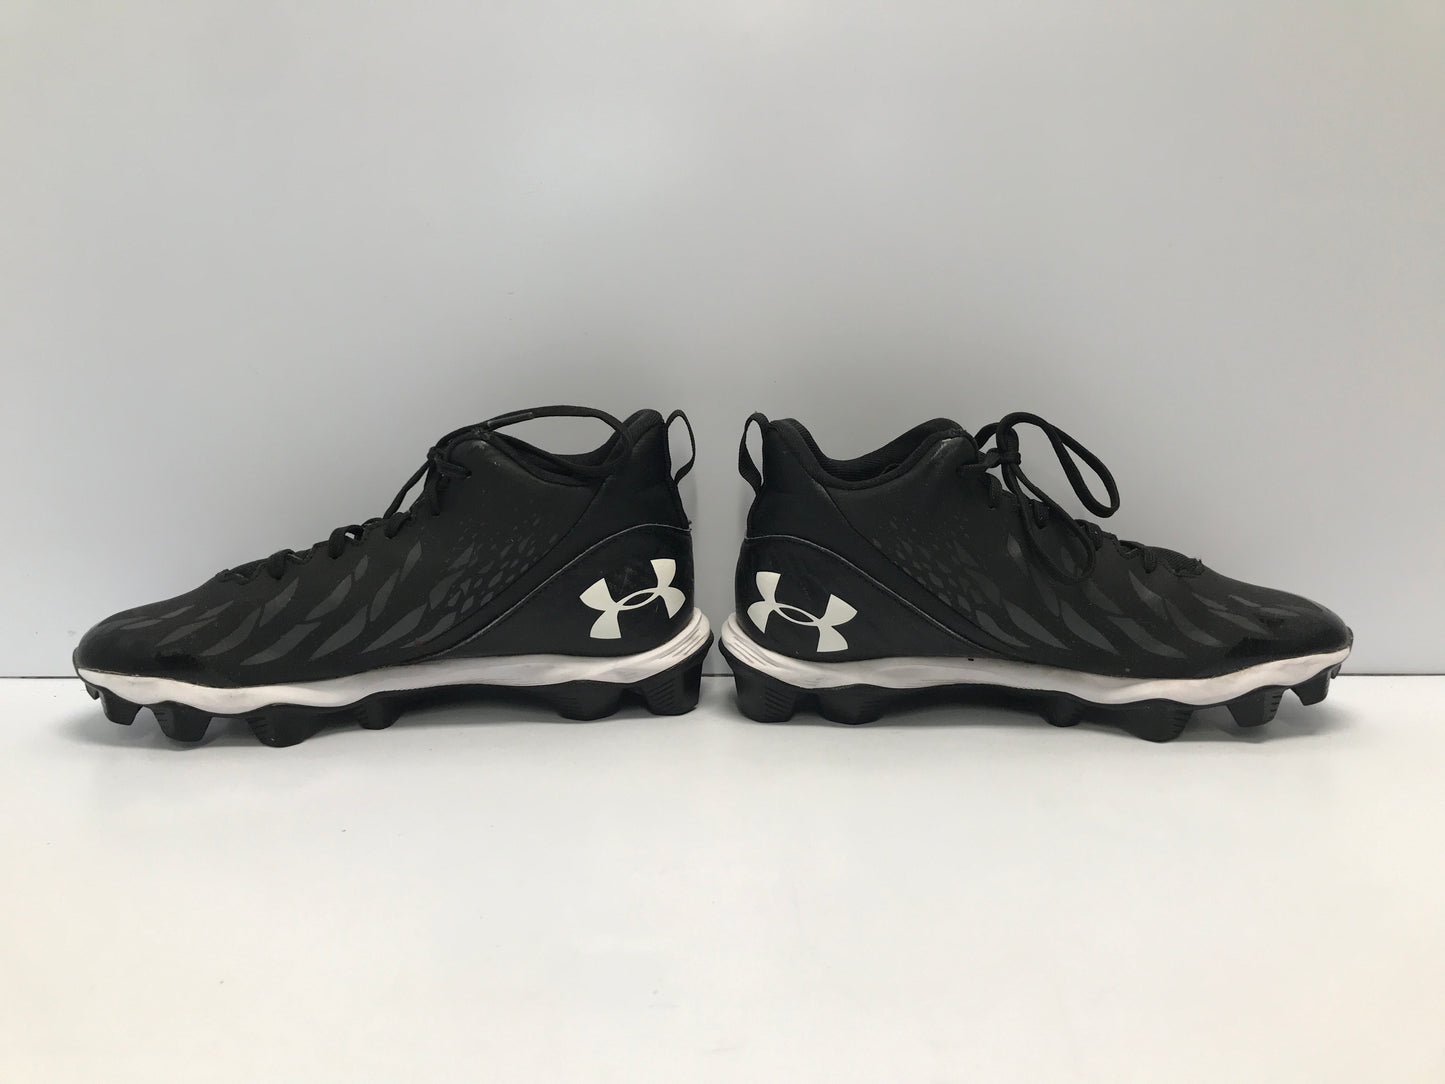 Baseball Shoes Cleats Child Size 6 Under Armour Black White Like New